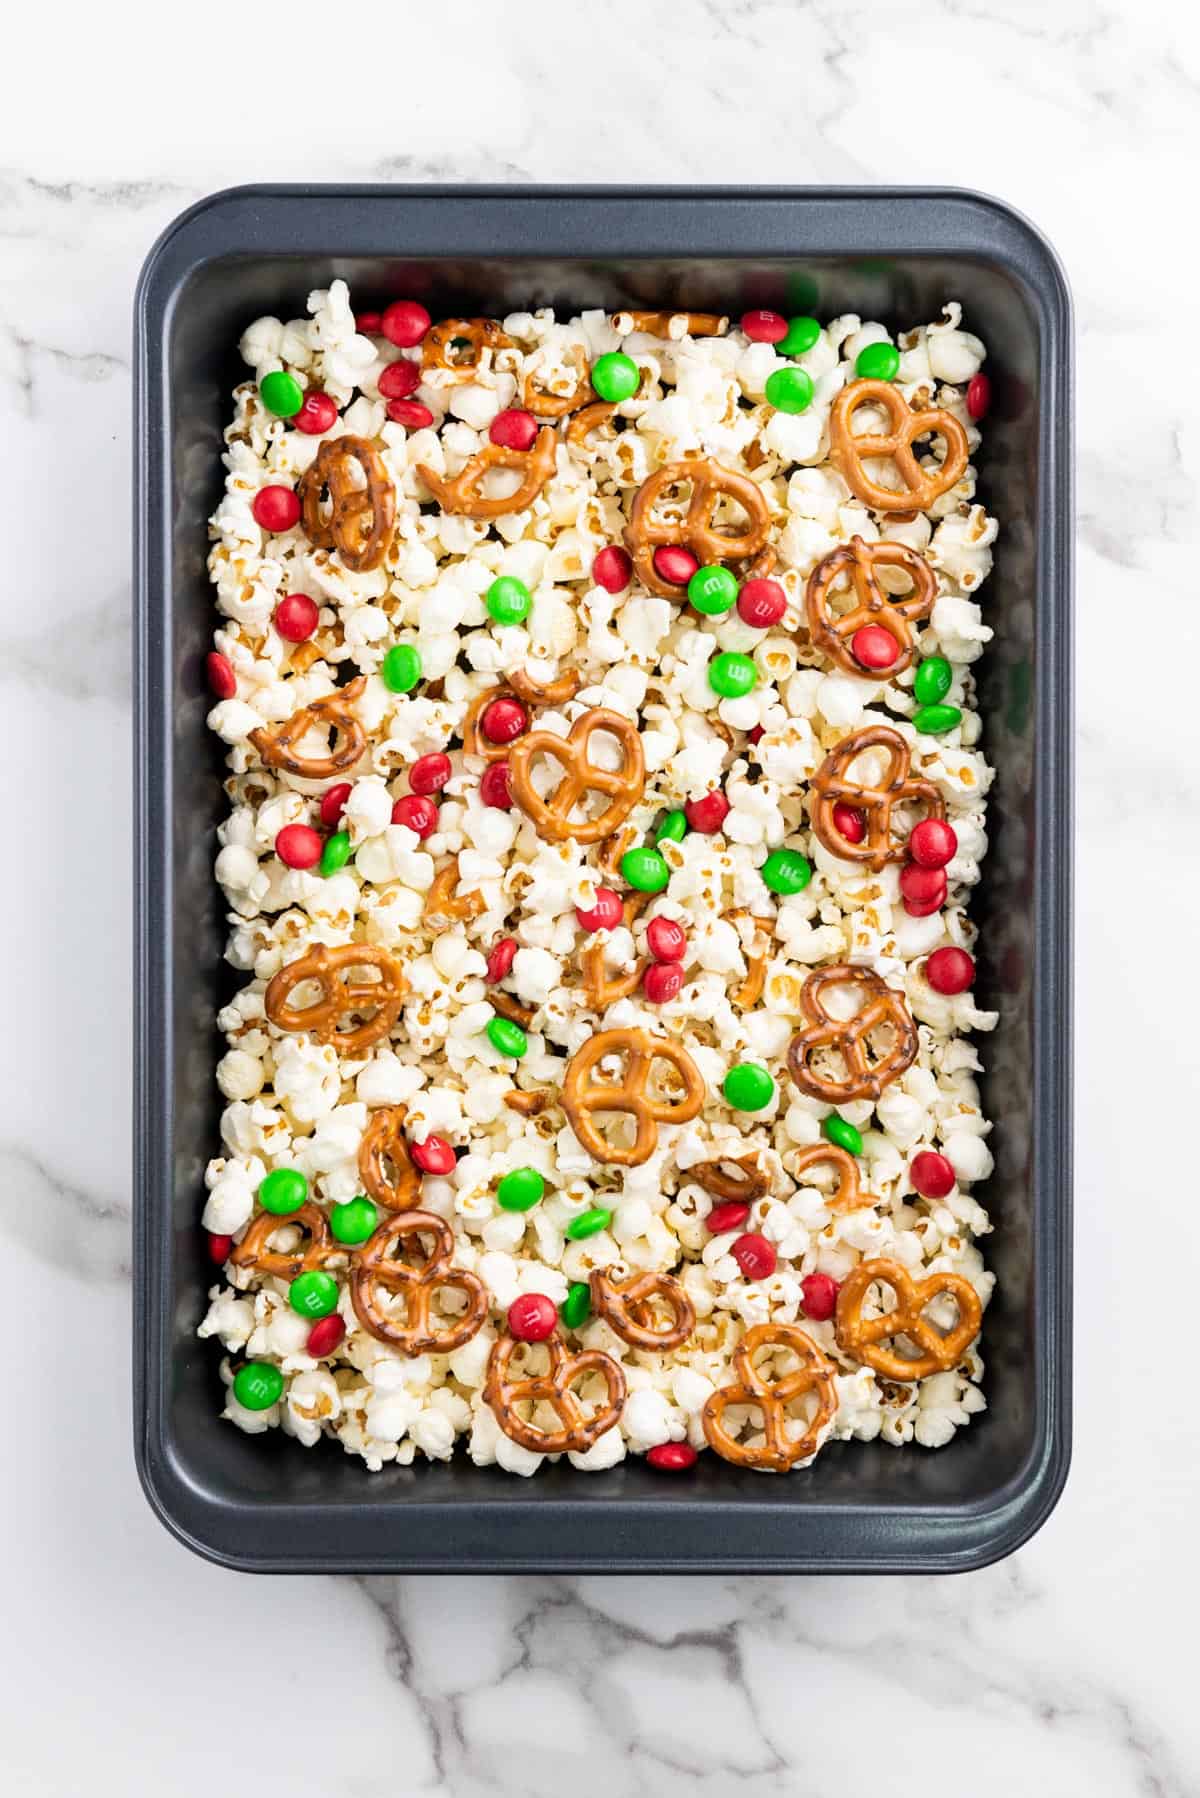 Popcorn, pretzels, and M&Ms on a black tray.